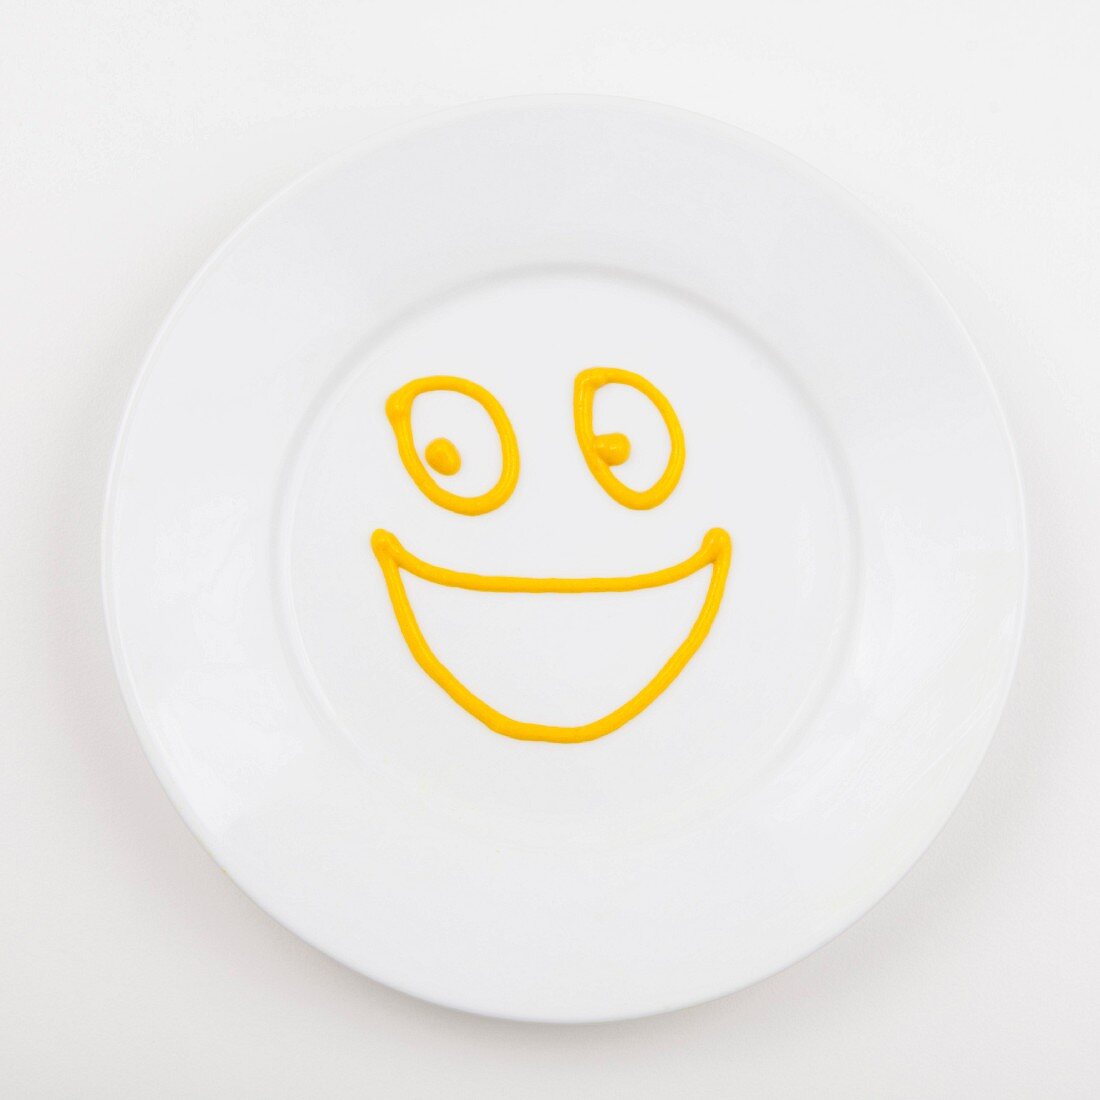 Plate with smiley face made of mustard